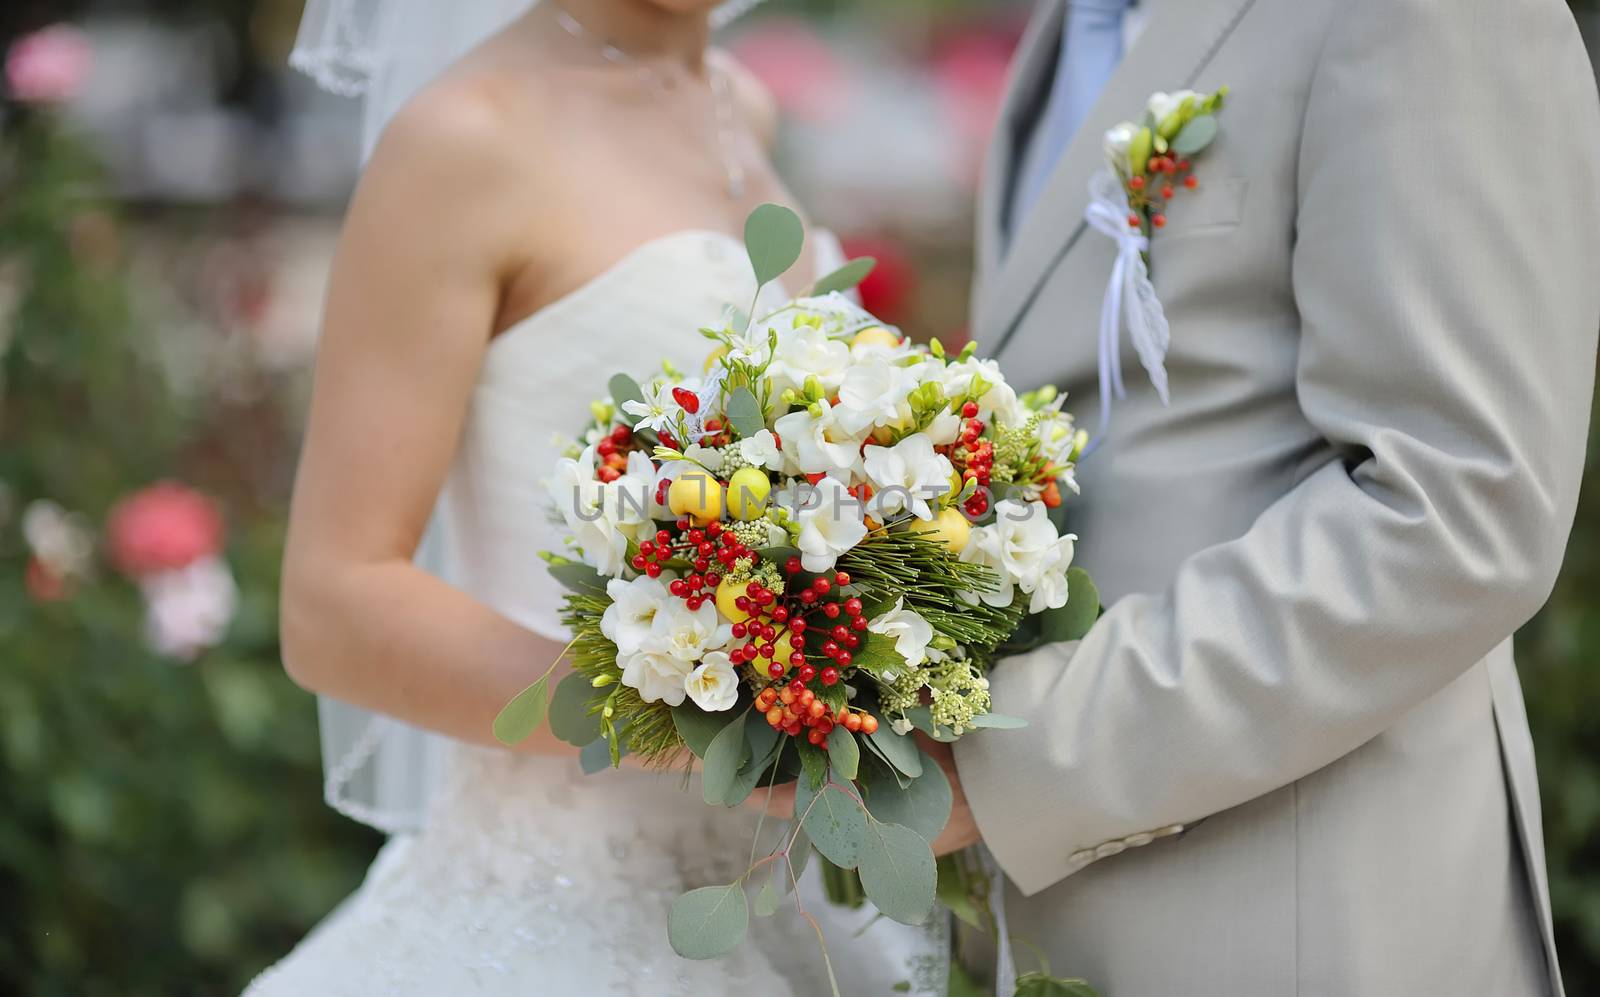 Bride holding wedding flower bouquet of white roses  by timonko